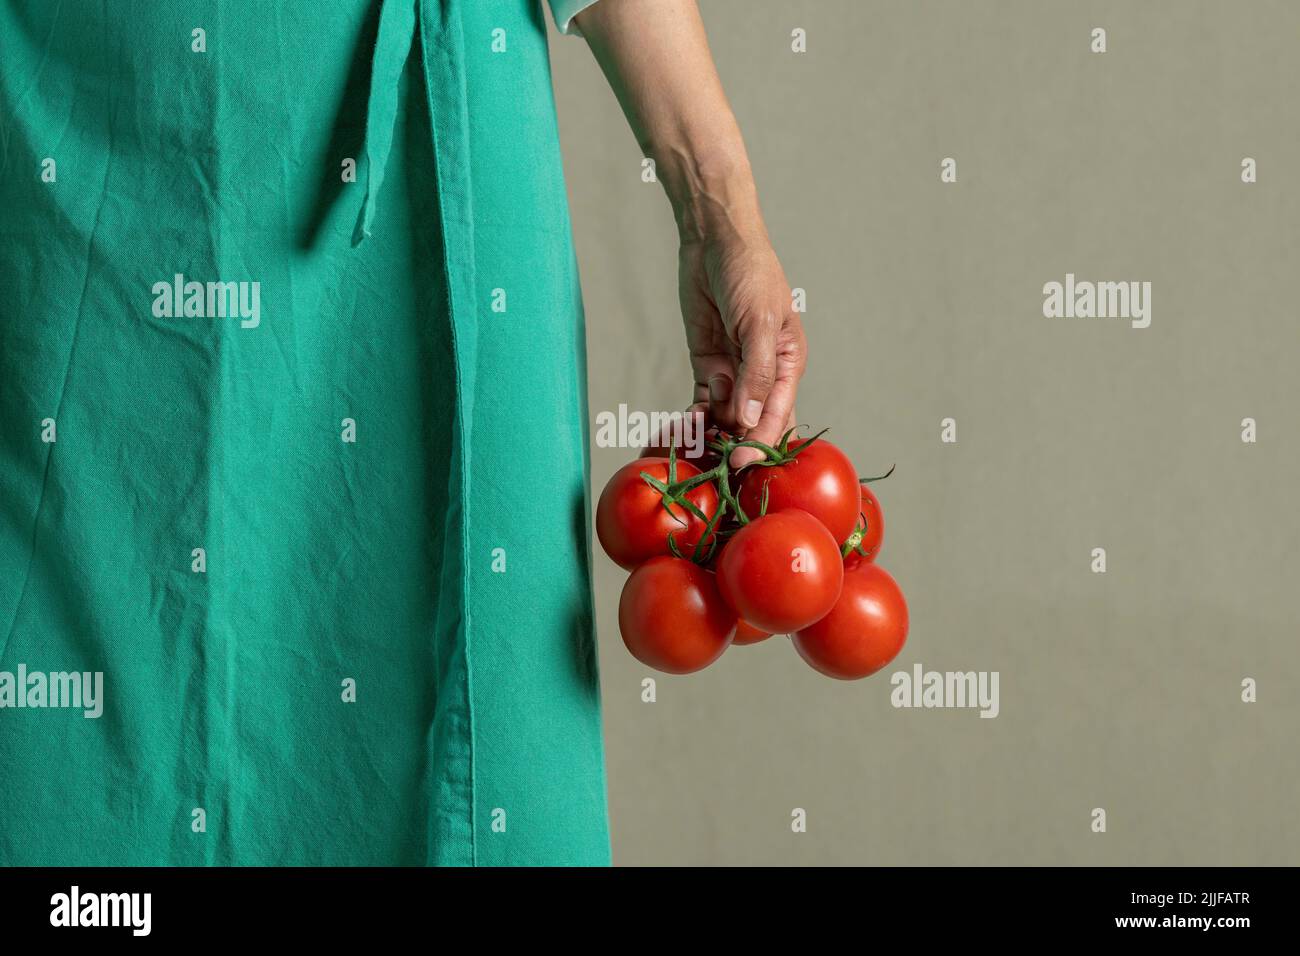 Woman holding bunch of vine tomatoes - stock photo Stock Photo